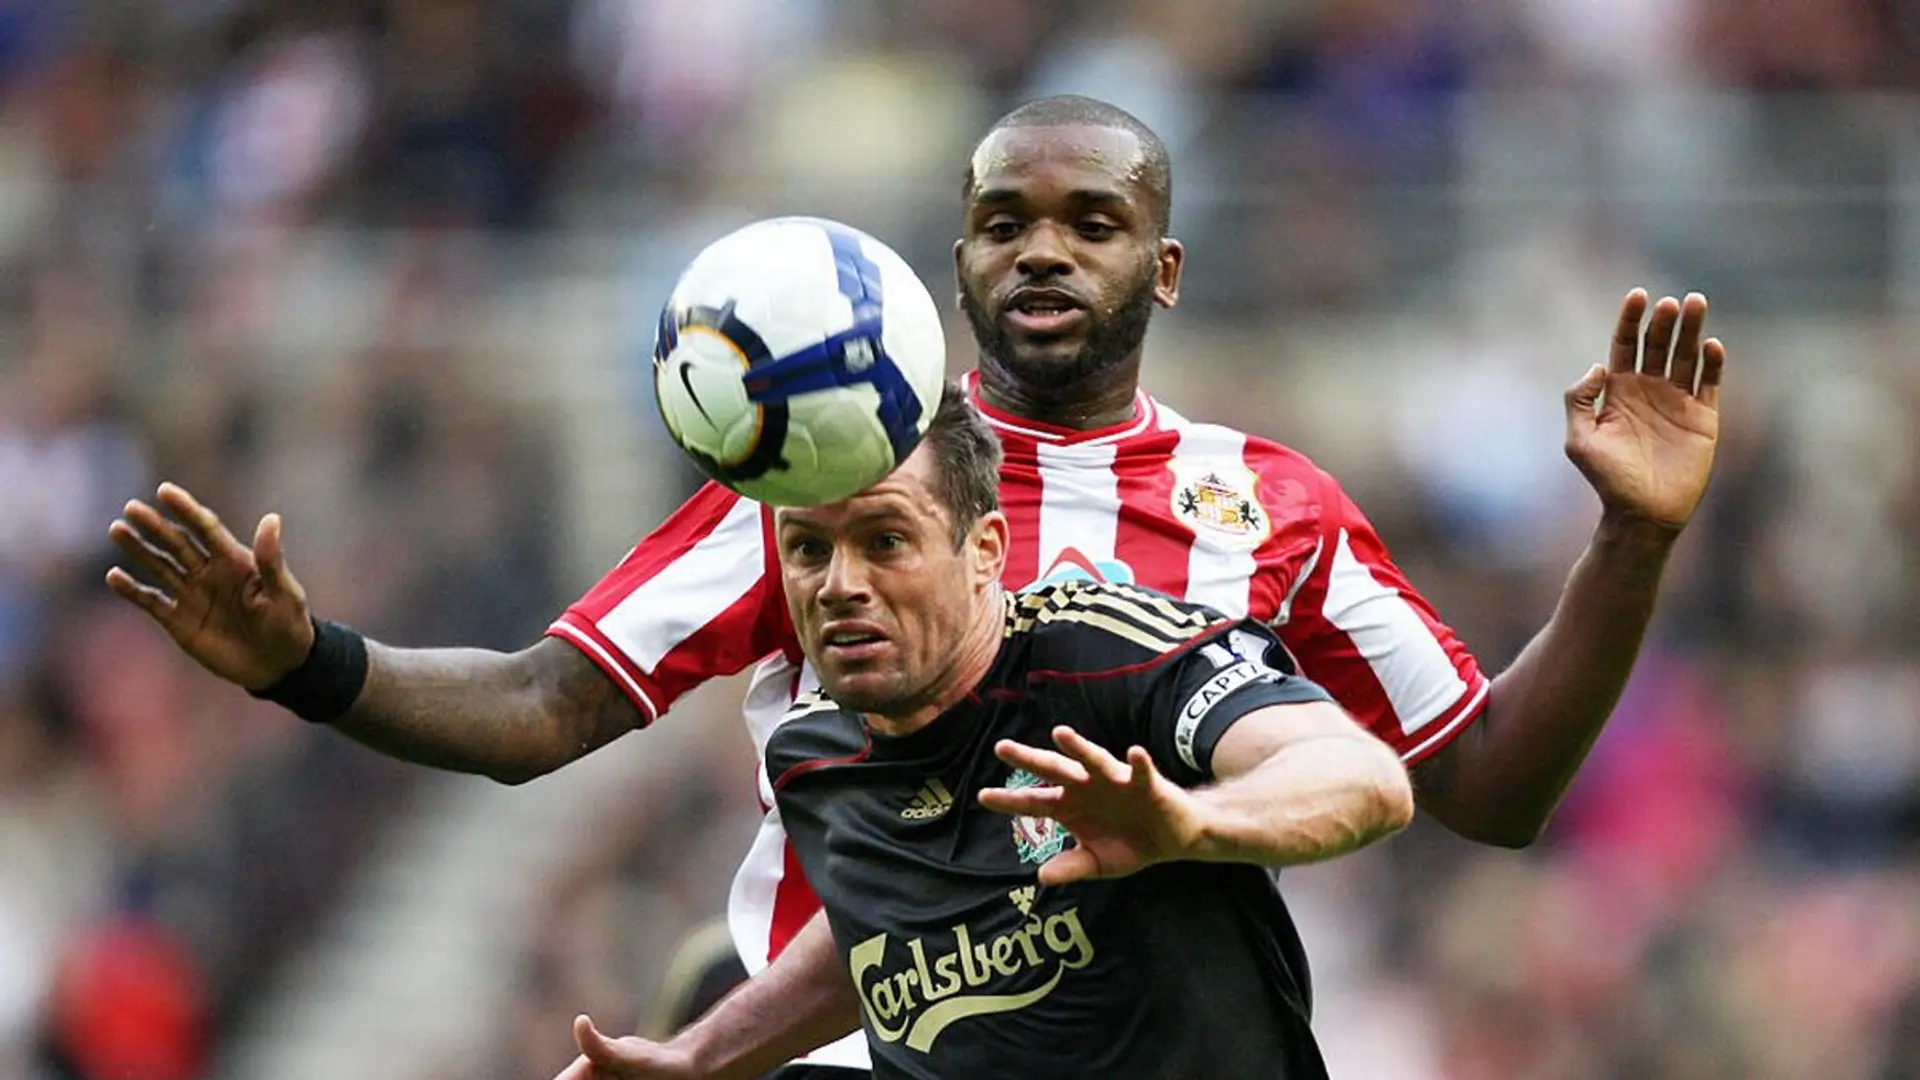 'He told me to come to Liverpool': Darren Bent reveals conversation with Carragher about Anfield move